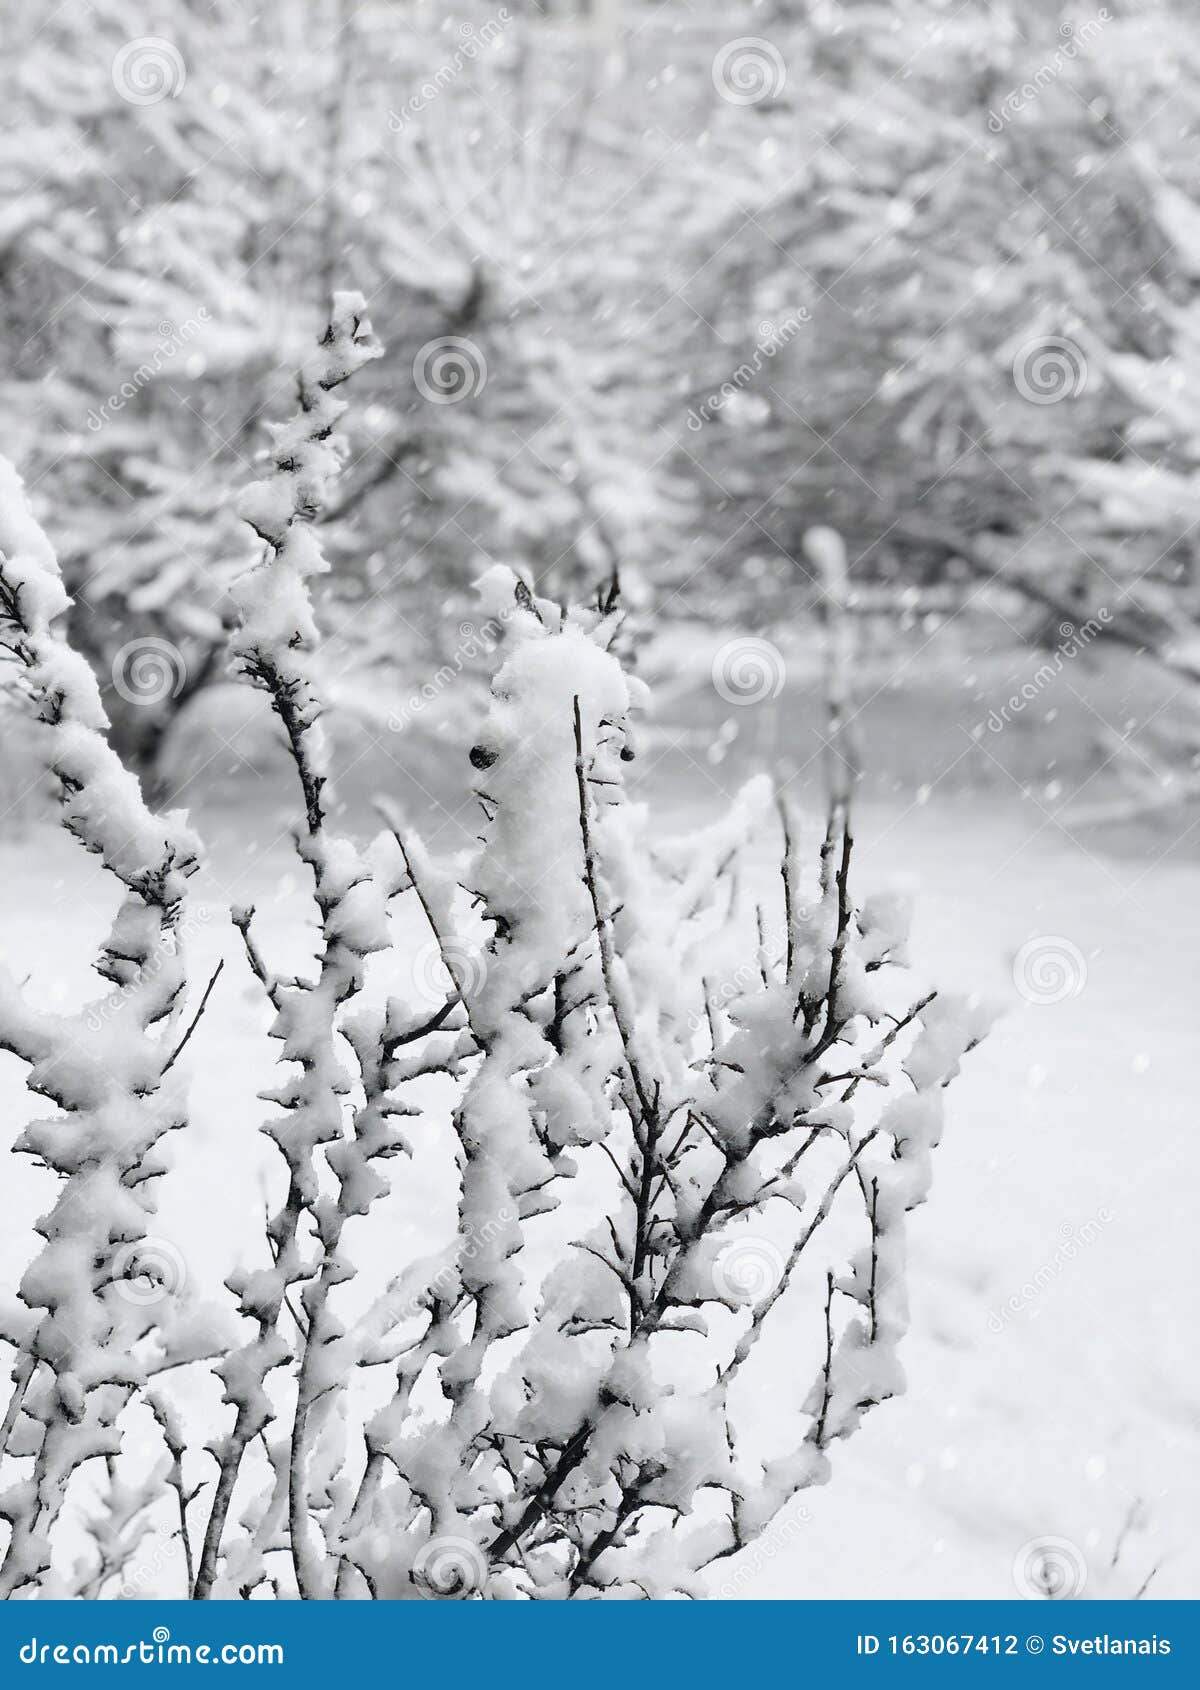 Snowfall in the Forest, Snow-covered Bush, Snow on the Tree Branches